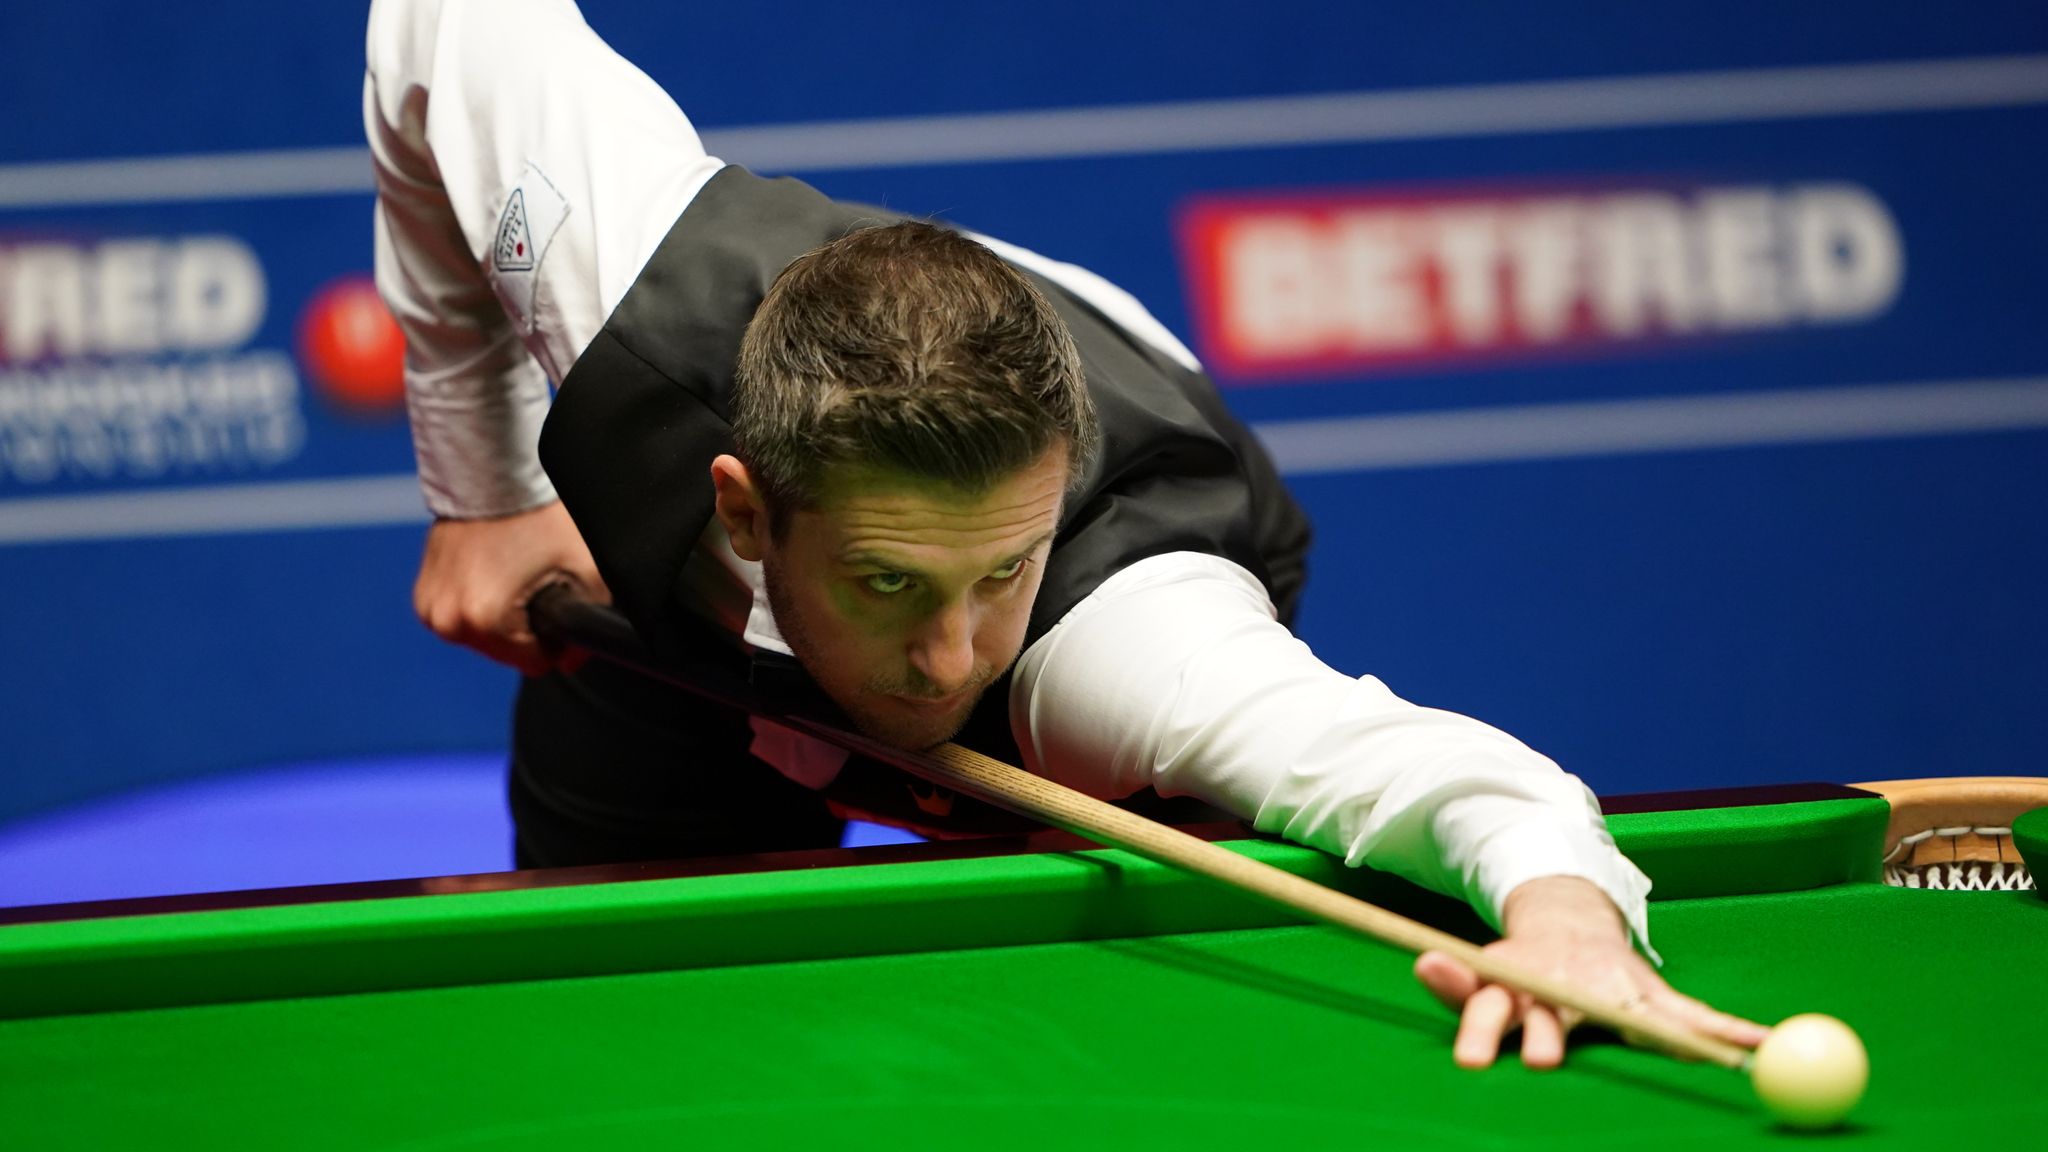 World Snooker Championship Shaun Murphy vows to entertain in final against Mark Selby Snooker News Sky Sports